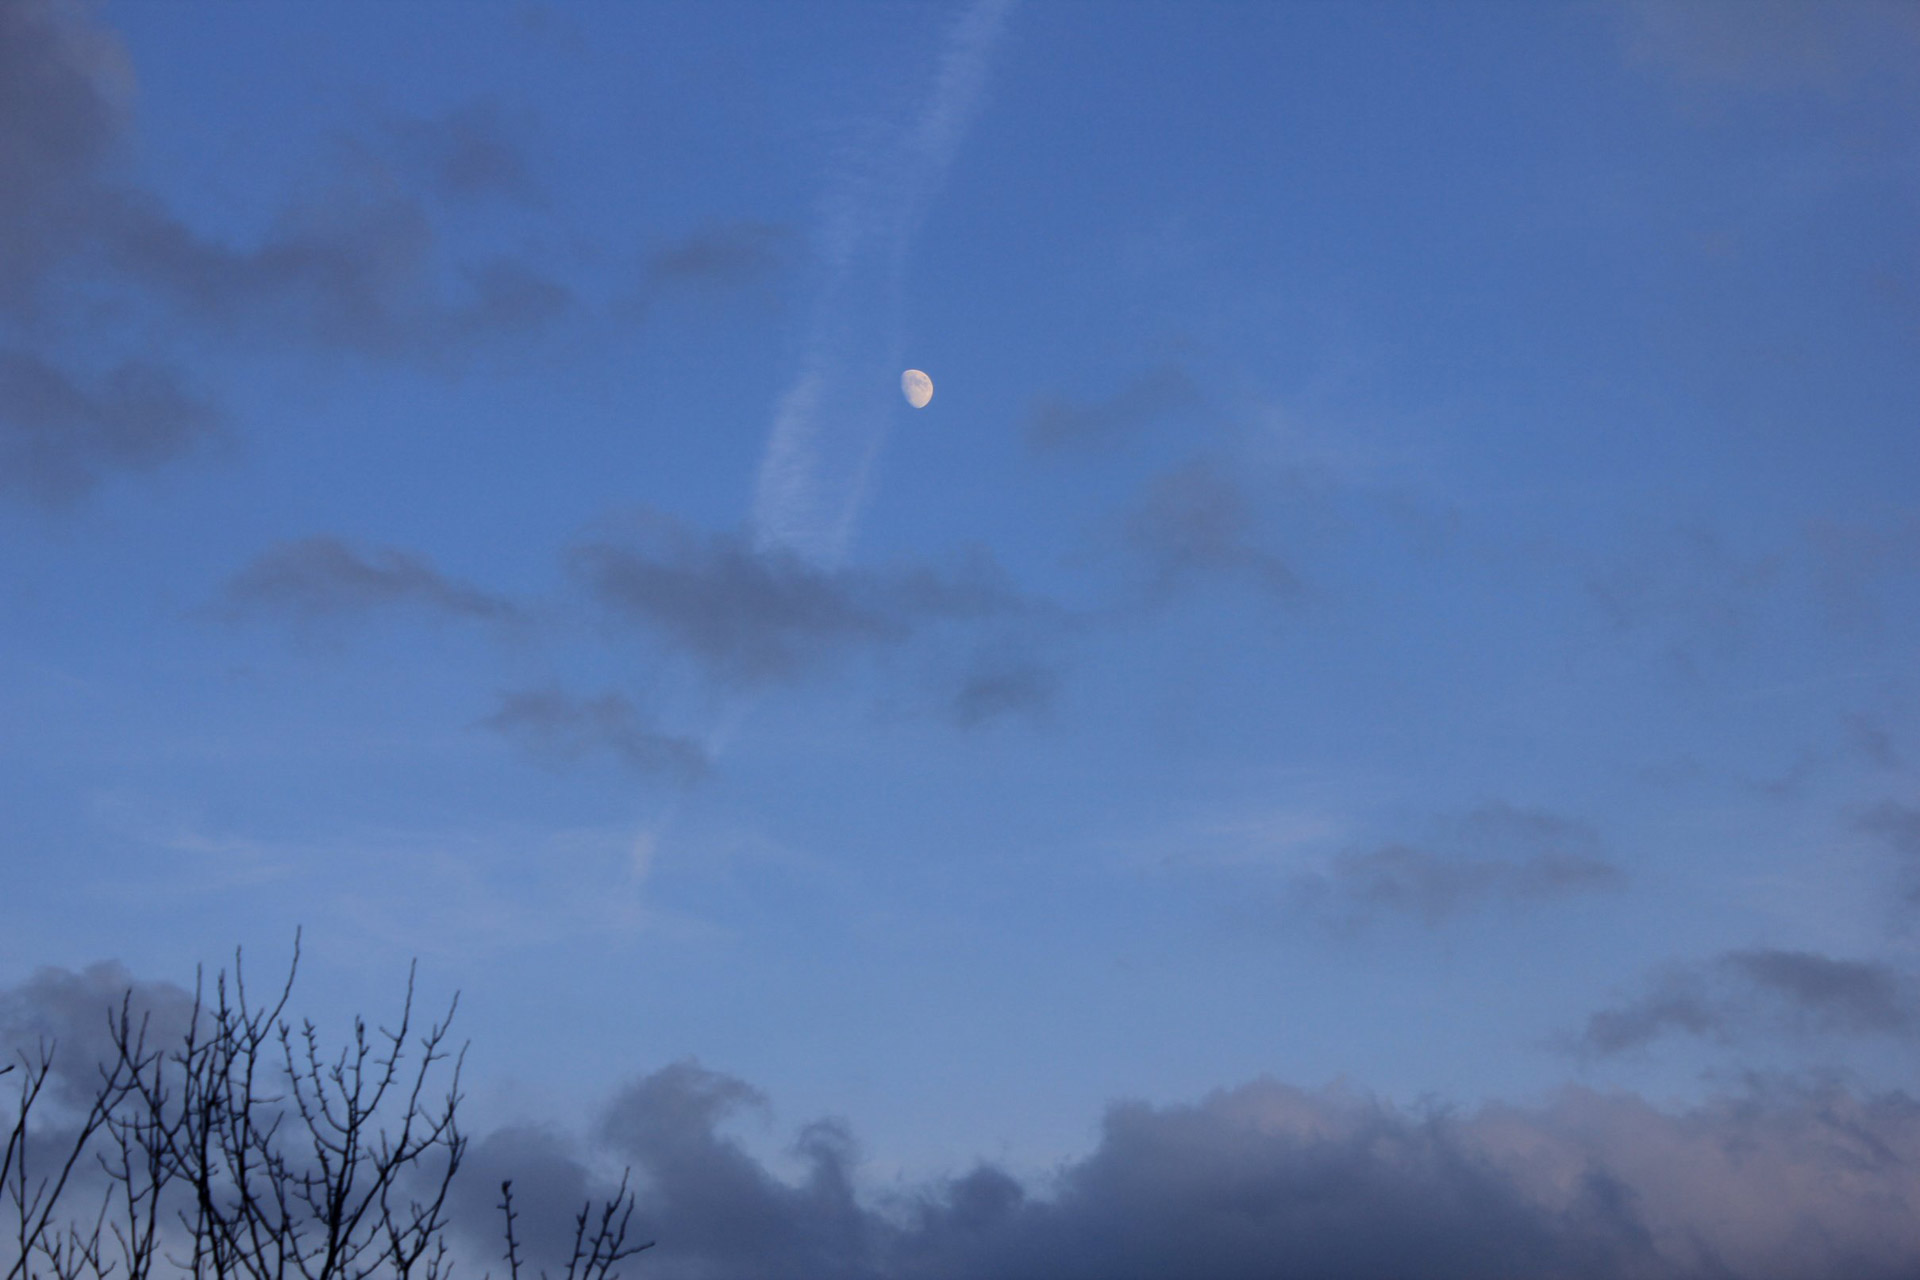 Night,sky,moon,clouds,clear night sky with half-moon - free image from